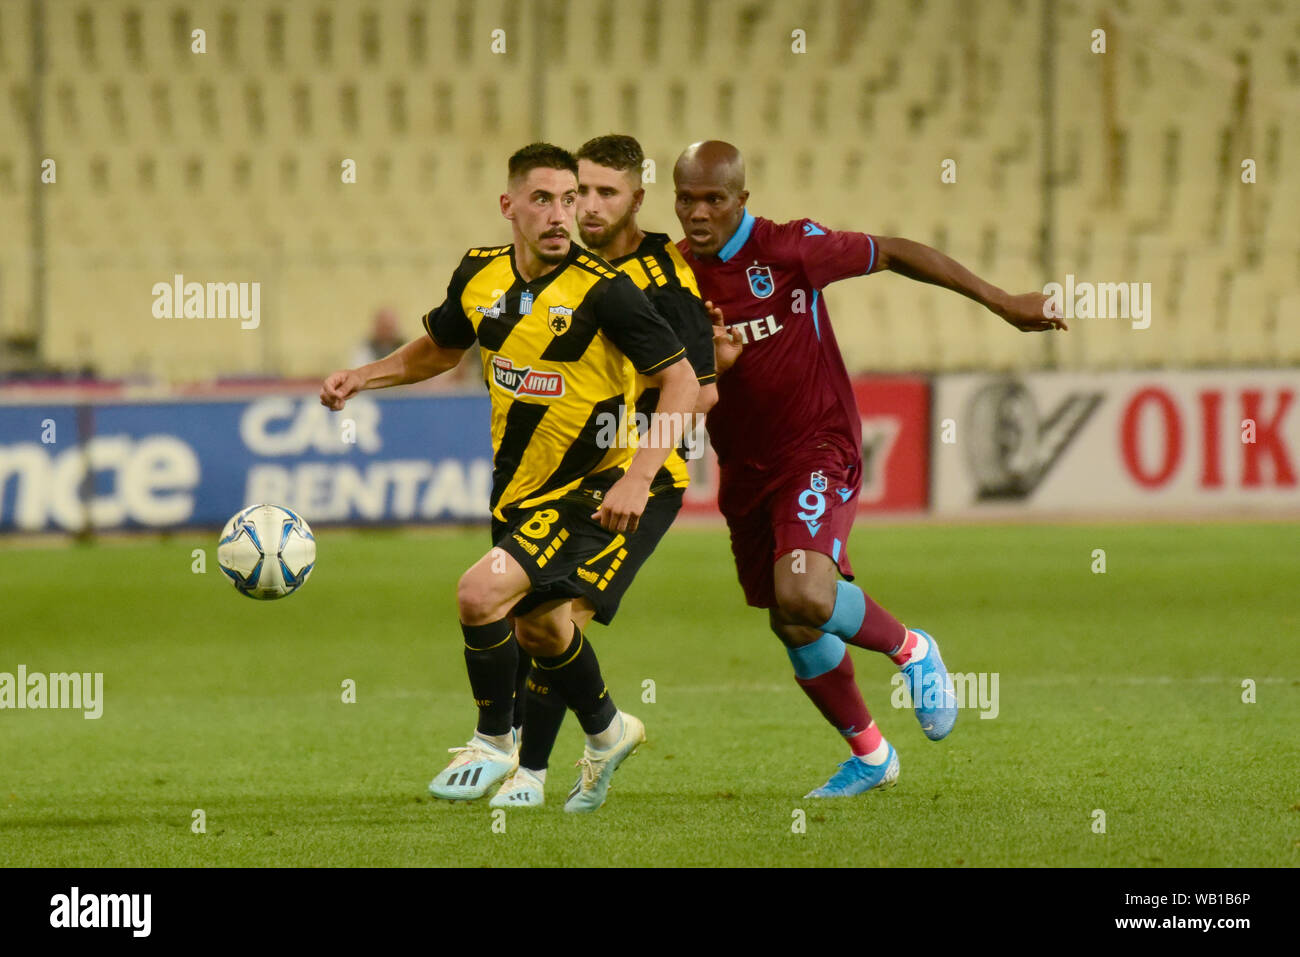 Simoes (no 8) of AEK and Nwakaeme (no 9) of Trabzonspor, vies for the ball. AEK didn't make it, despite scoring in the 4 ', eventually lost 3-1 to  Trabzonspor in the first